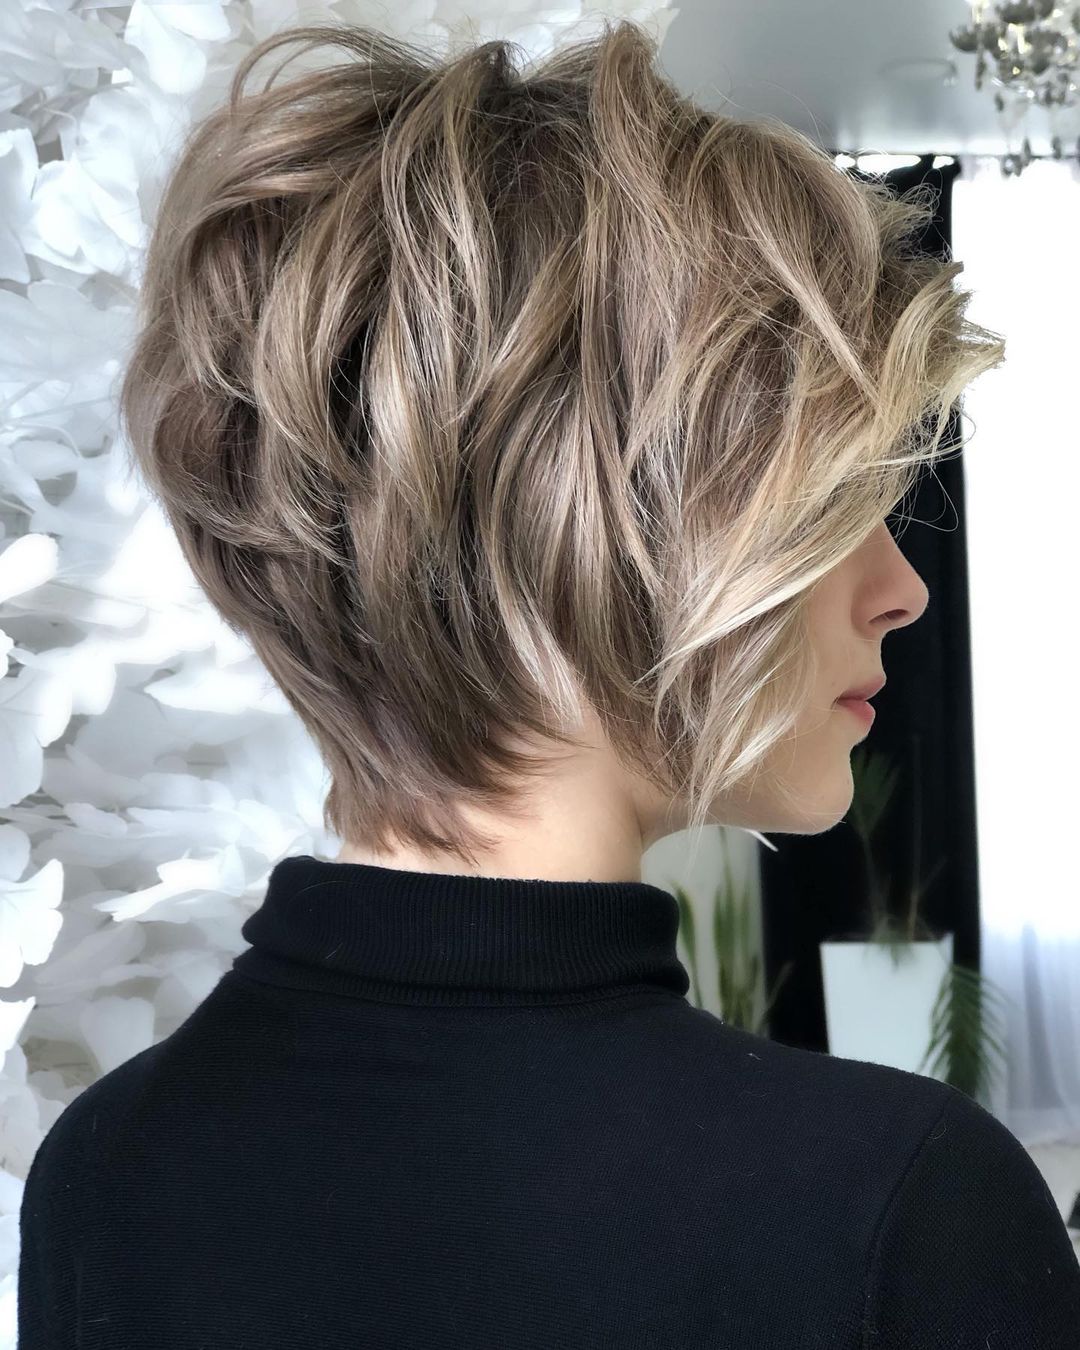 Stylish Short Haircuts for Thick Hair - Cute Short Hairstyles for Women